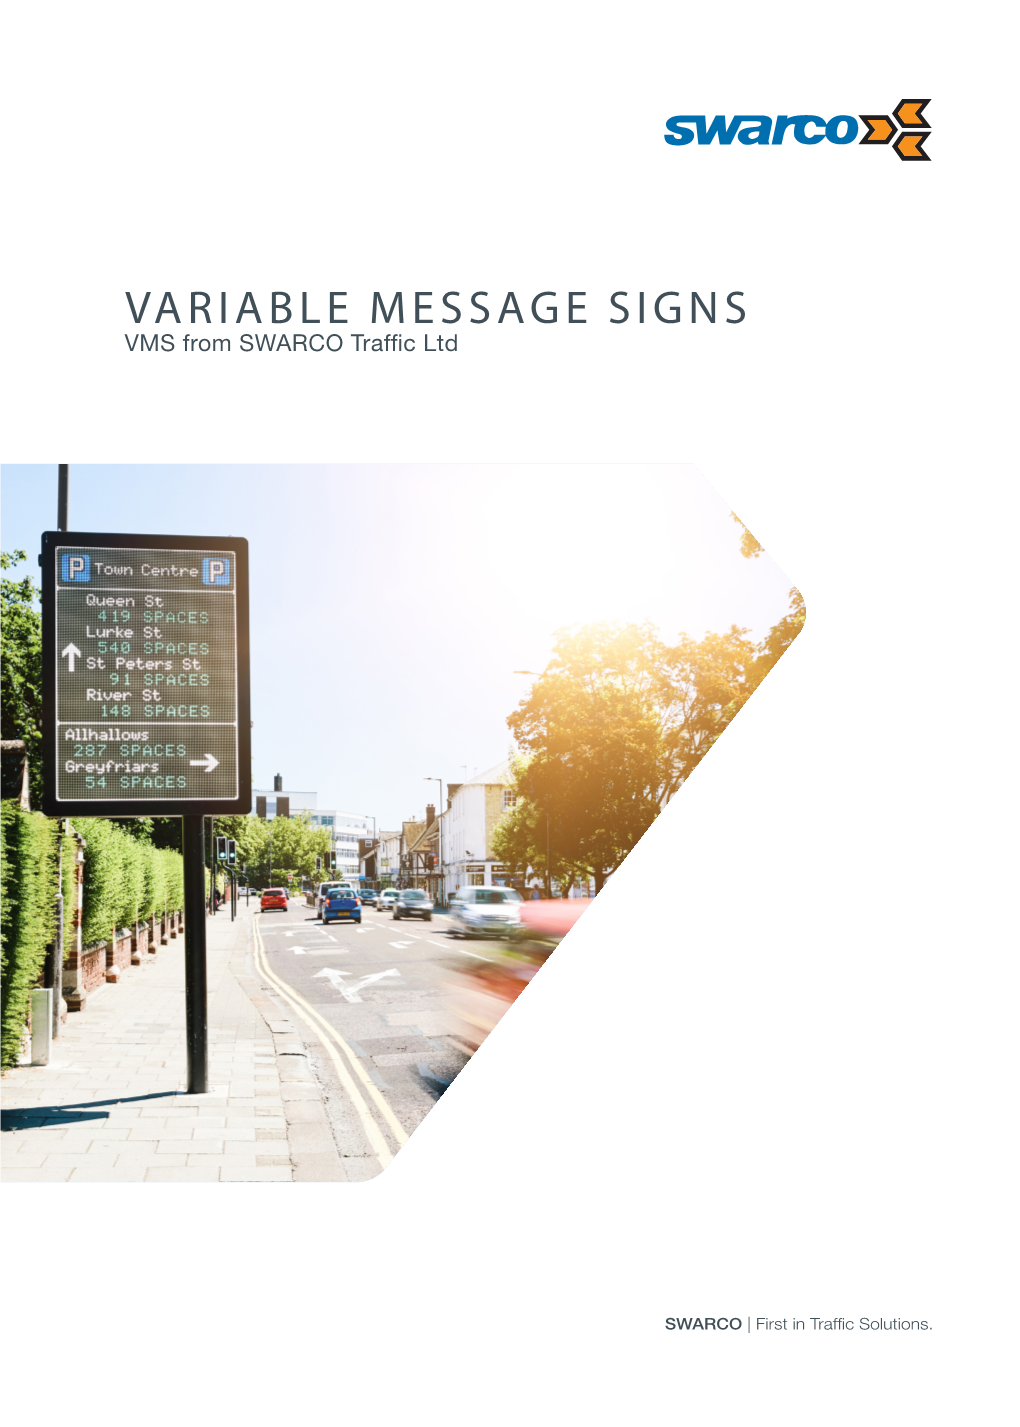 VARIABLE MESSAGE SIGNS VMS from SWARCO Traffic Ltd 2 PARKING GUIDANCE Moving People Around Cities Smoothly and Effectively Is at the Heart of the SWARCO Portfolio